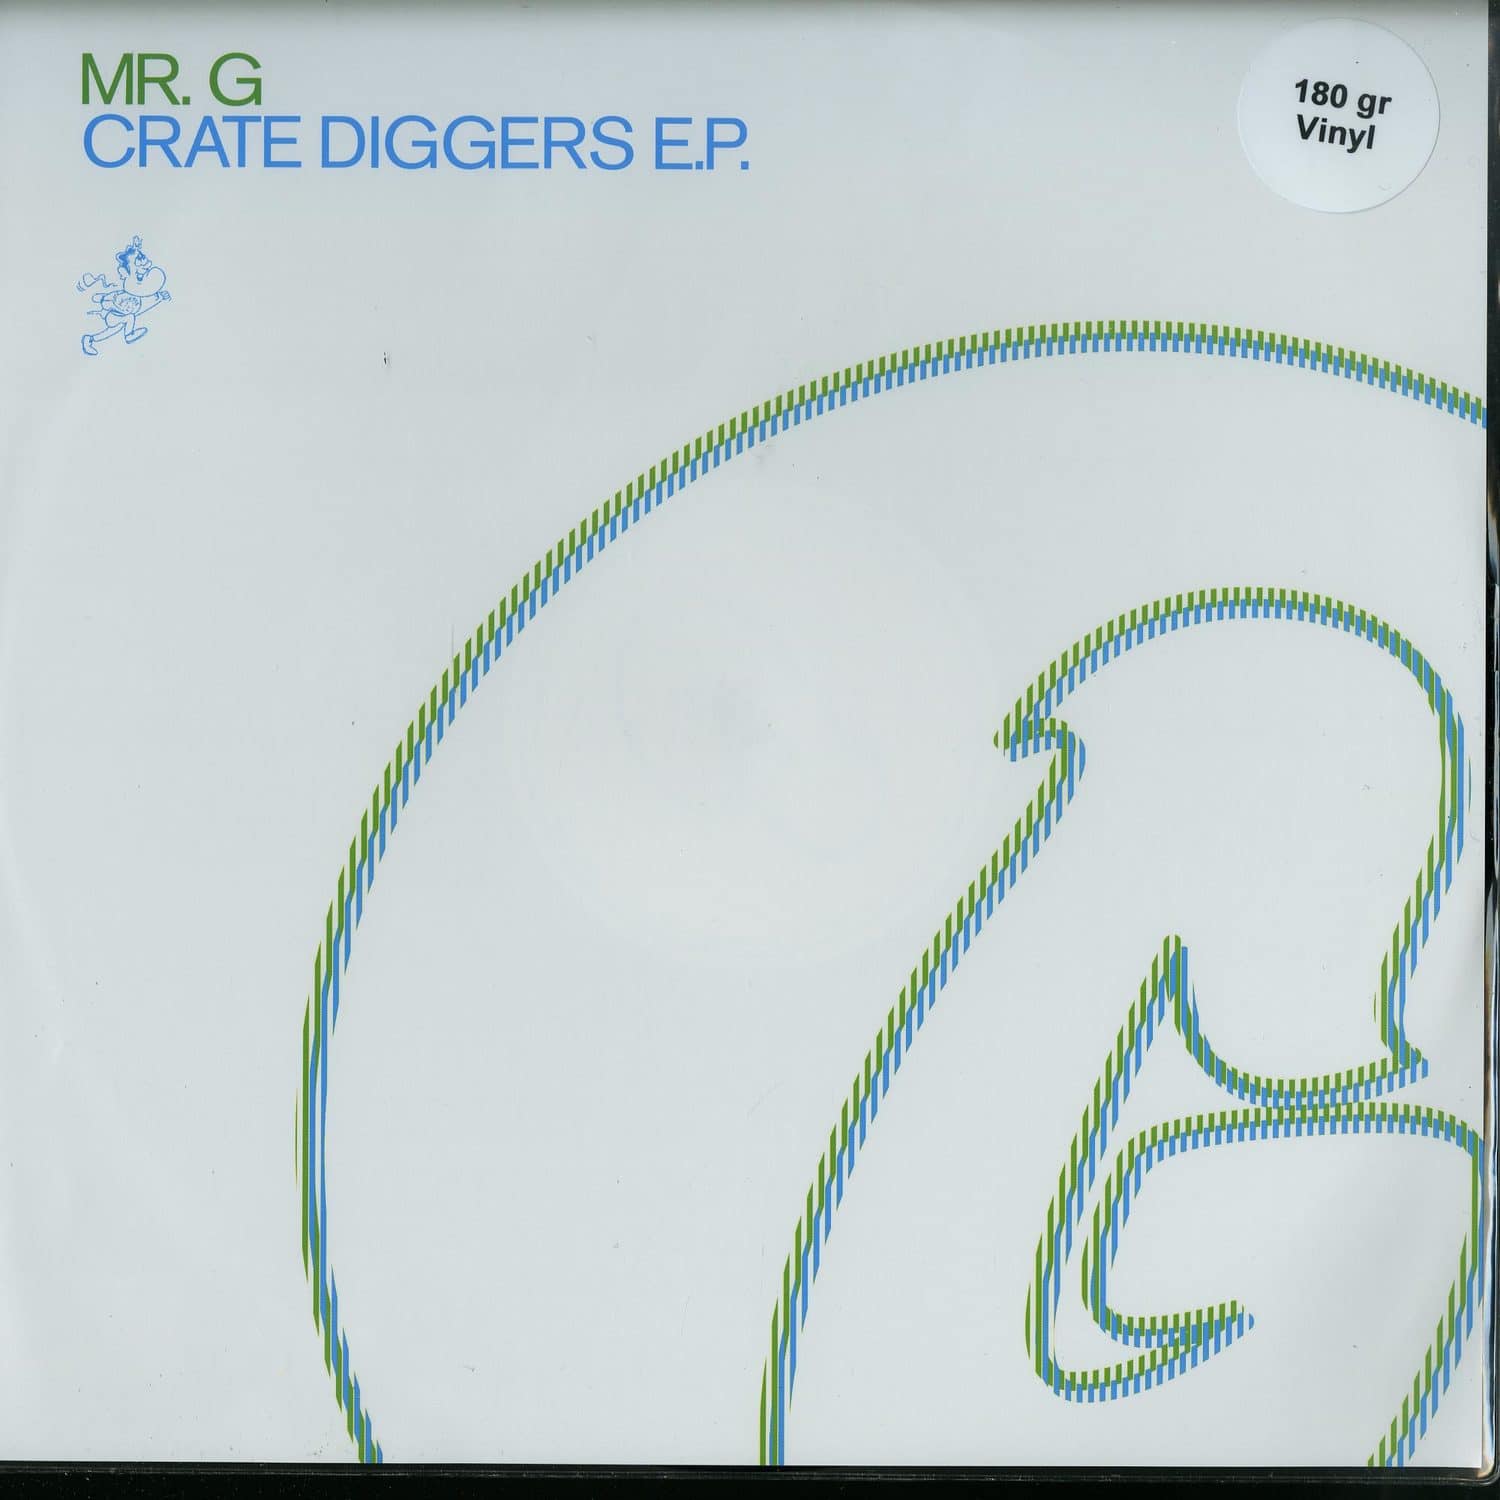 Mr. G - CRATE DIGGERS EP